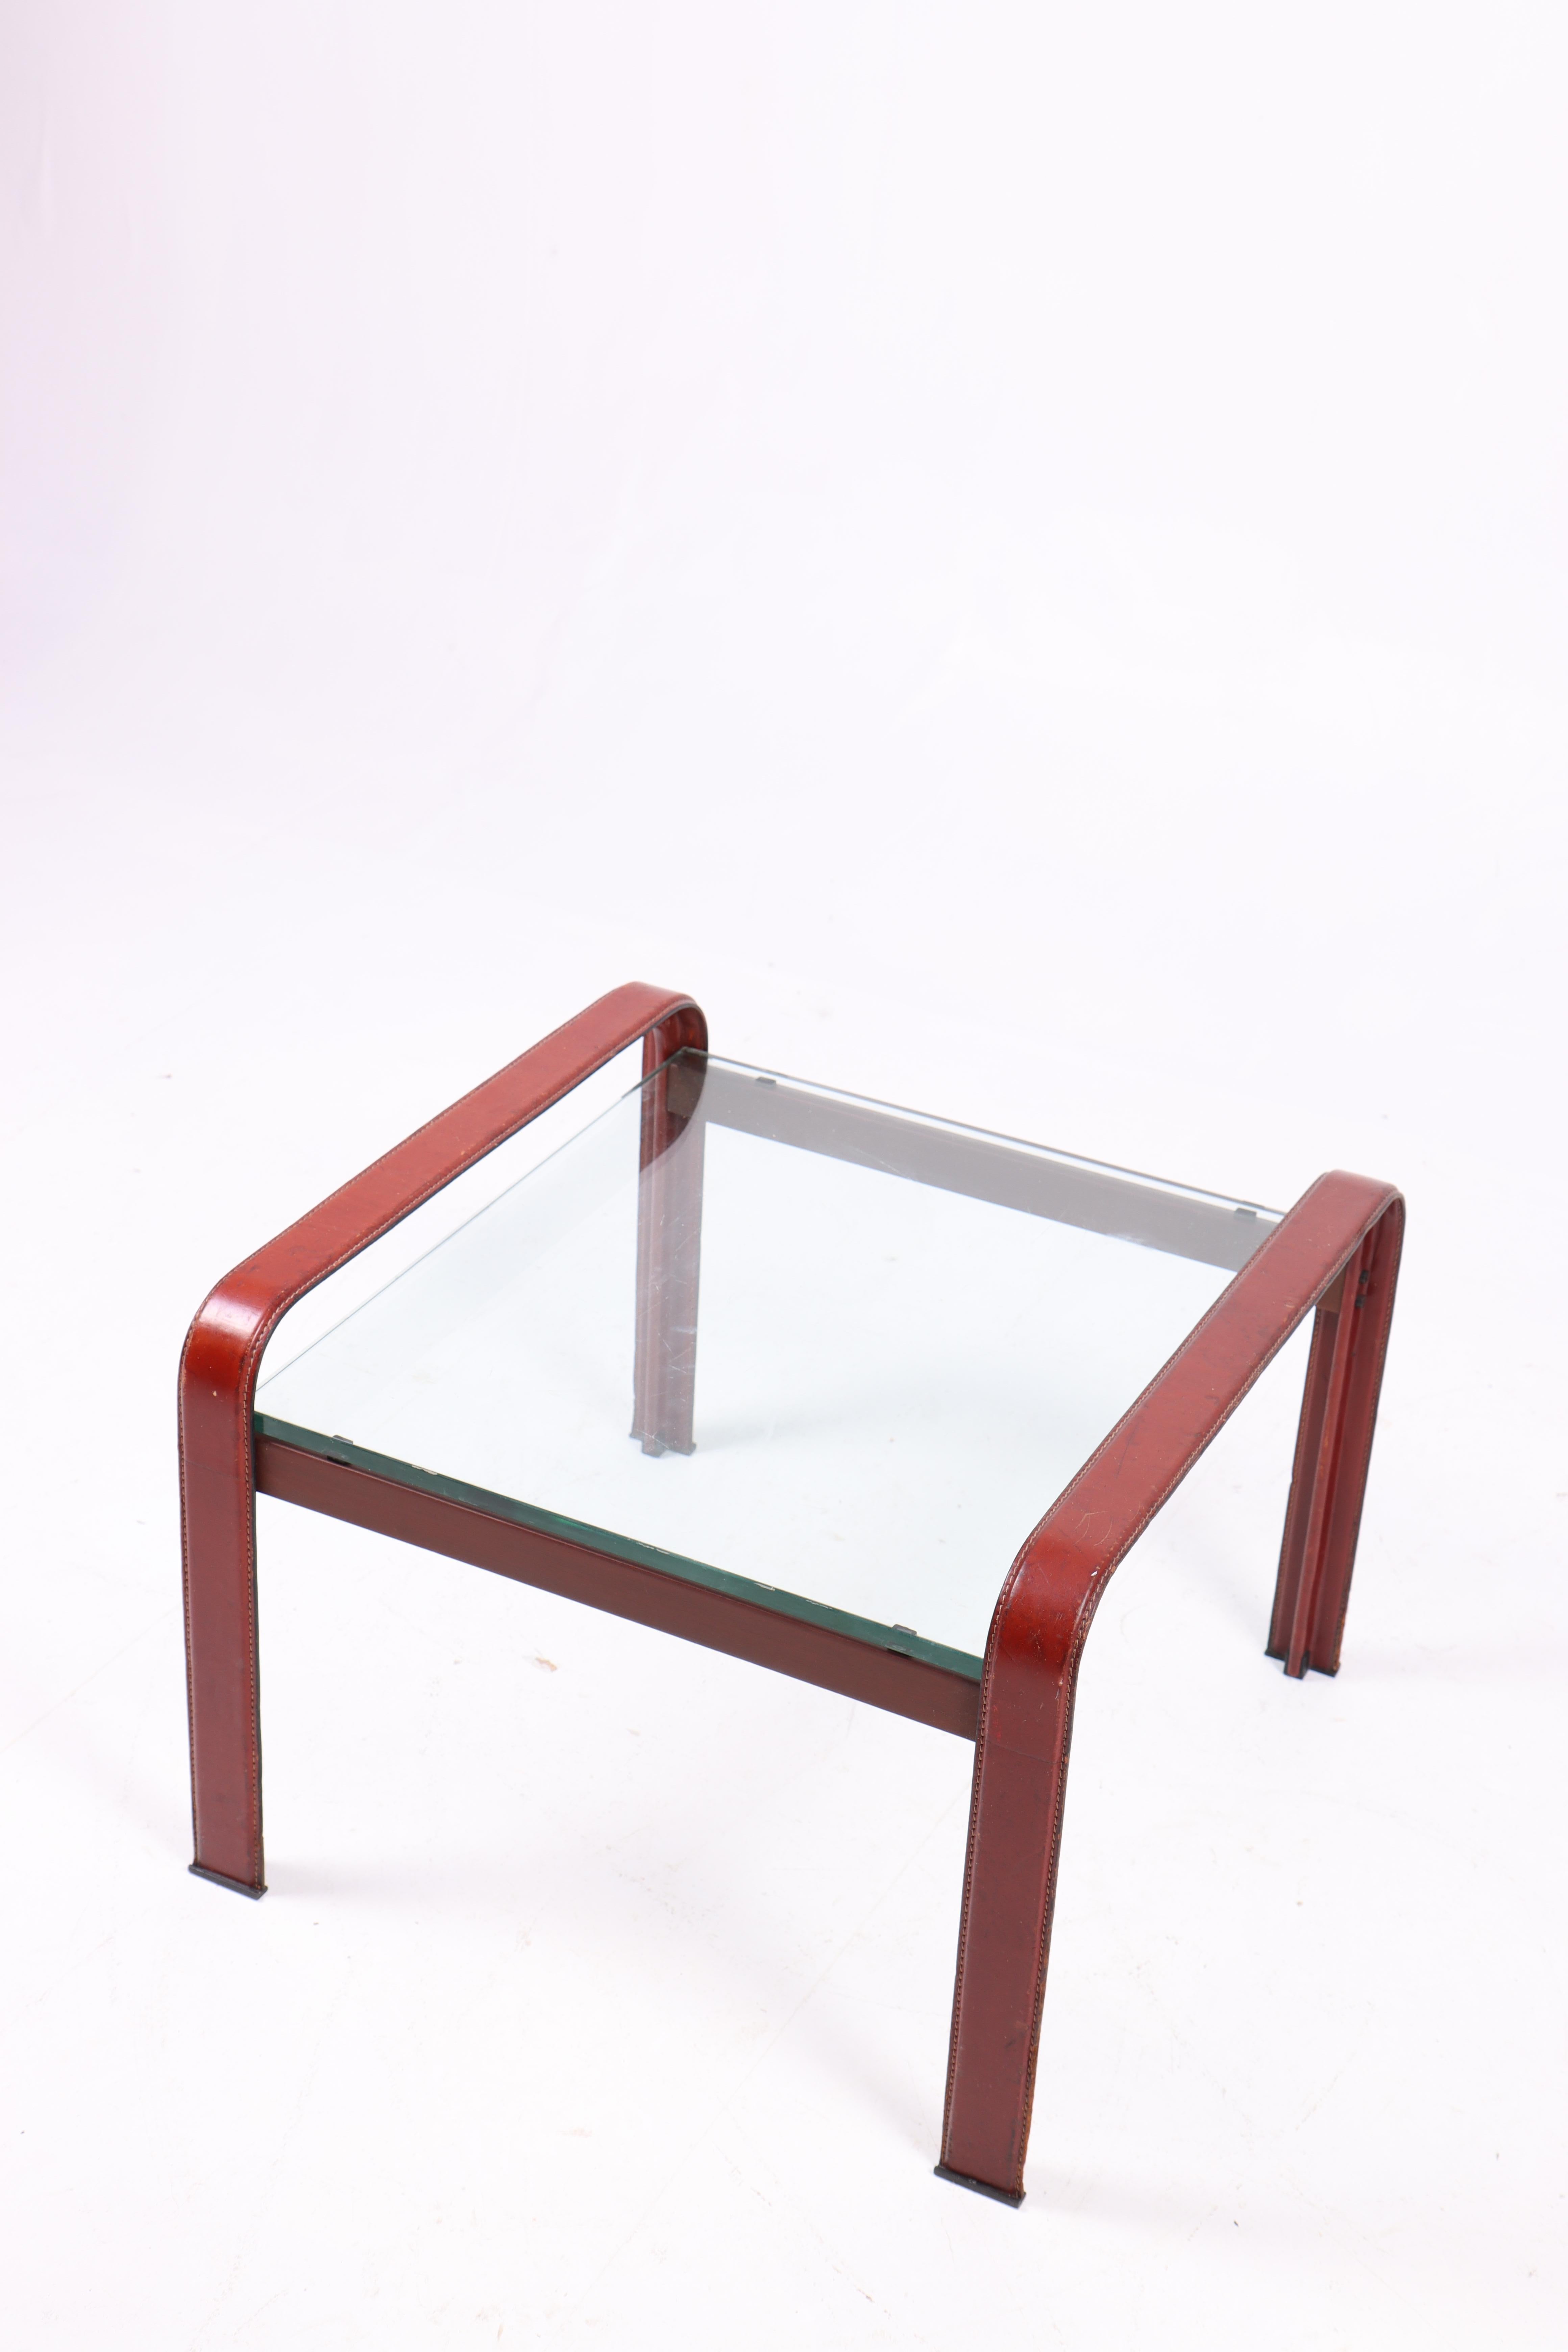 Scandinavian Modern Low Table in Patinated Leather by Matteo Grassi, 1970s For Sale